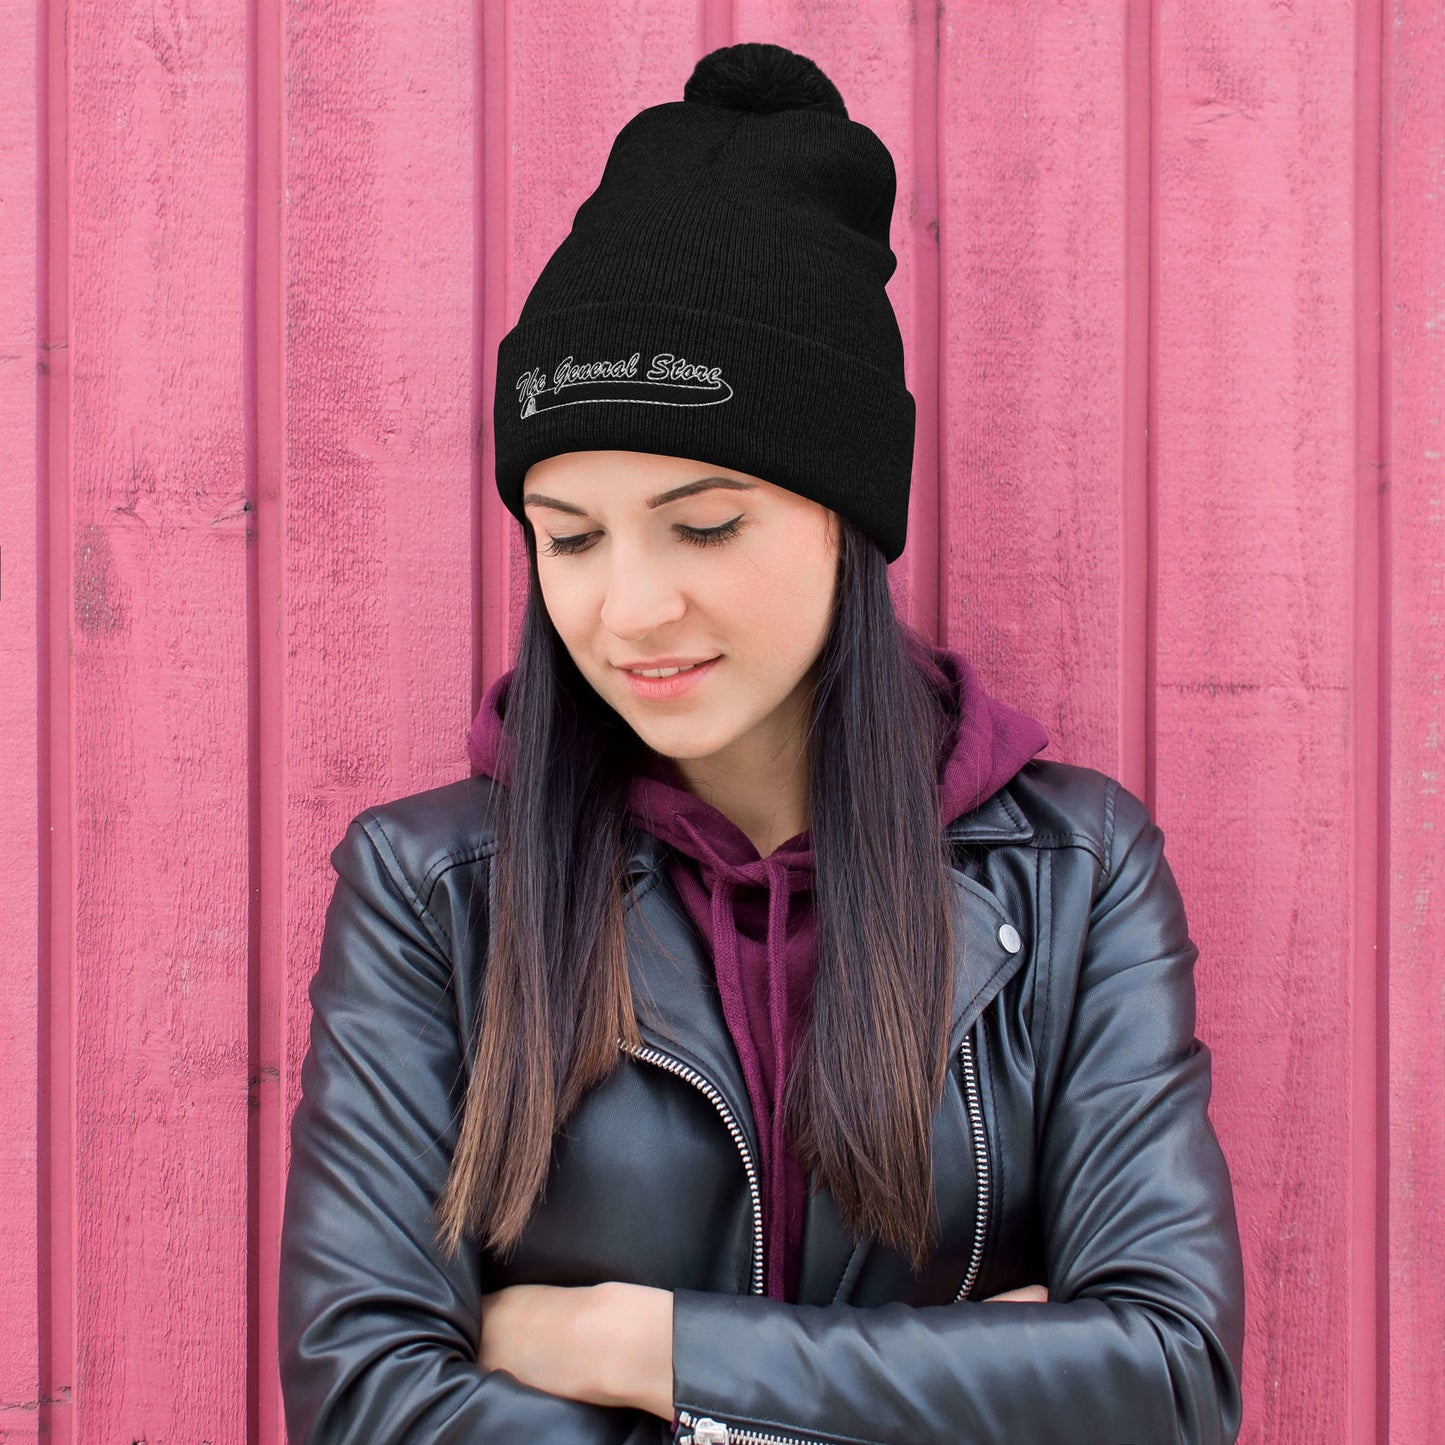 The General Store Embroidered Pom-Pom Beanie